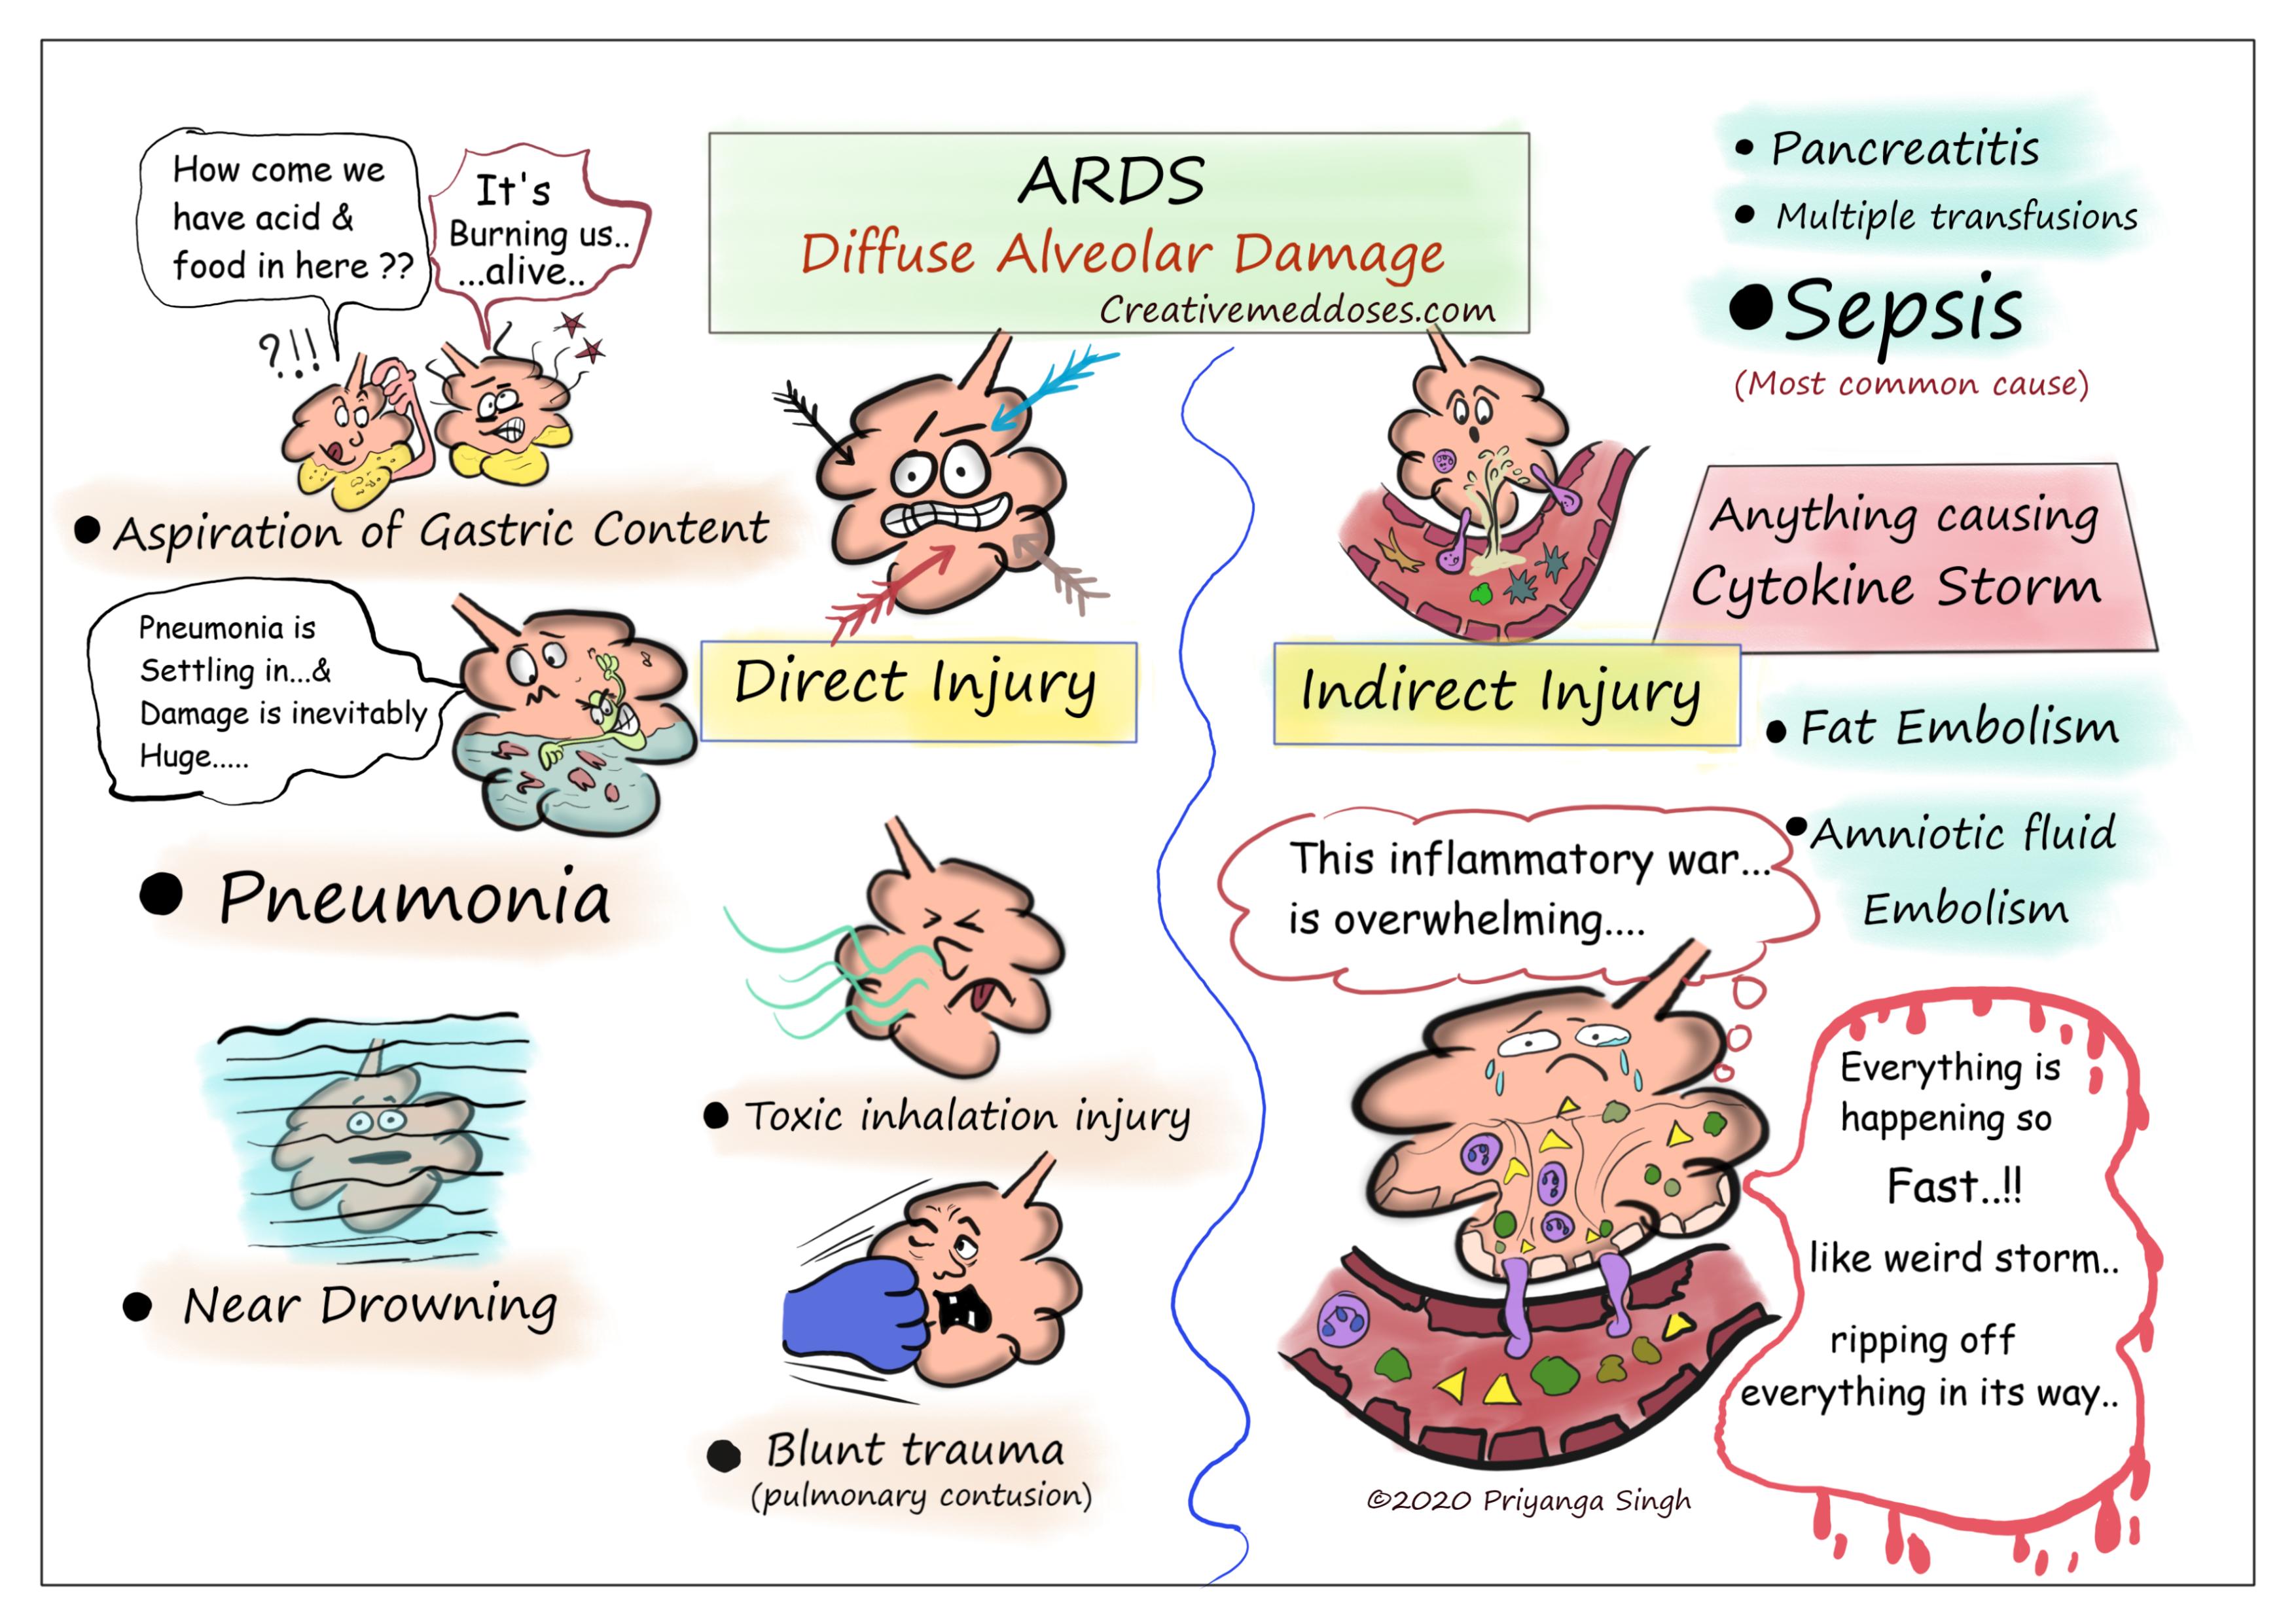 Acute Respiratory Distress Syndrome: Etiology image